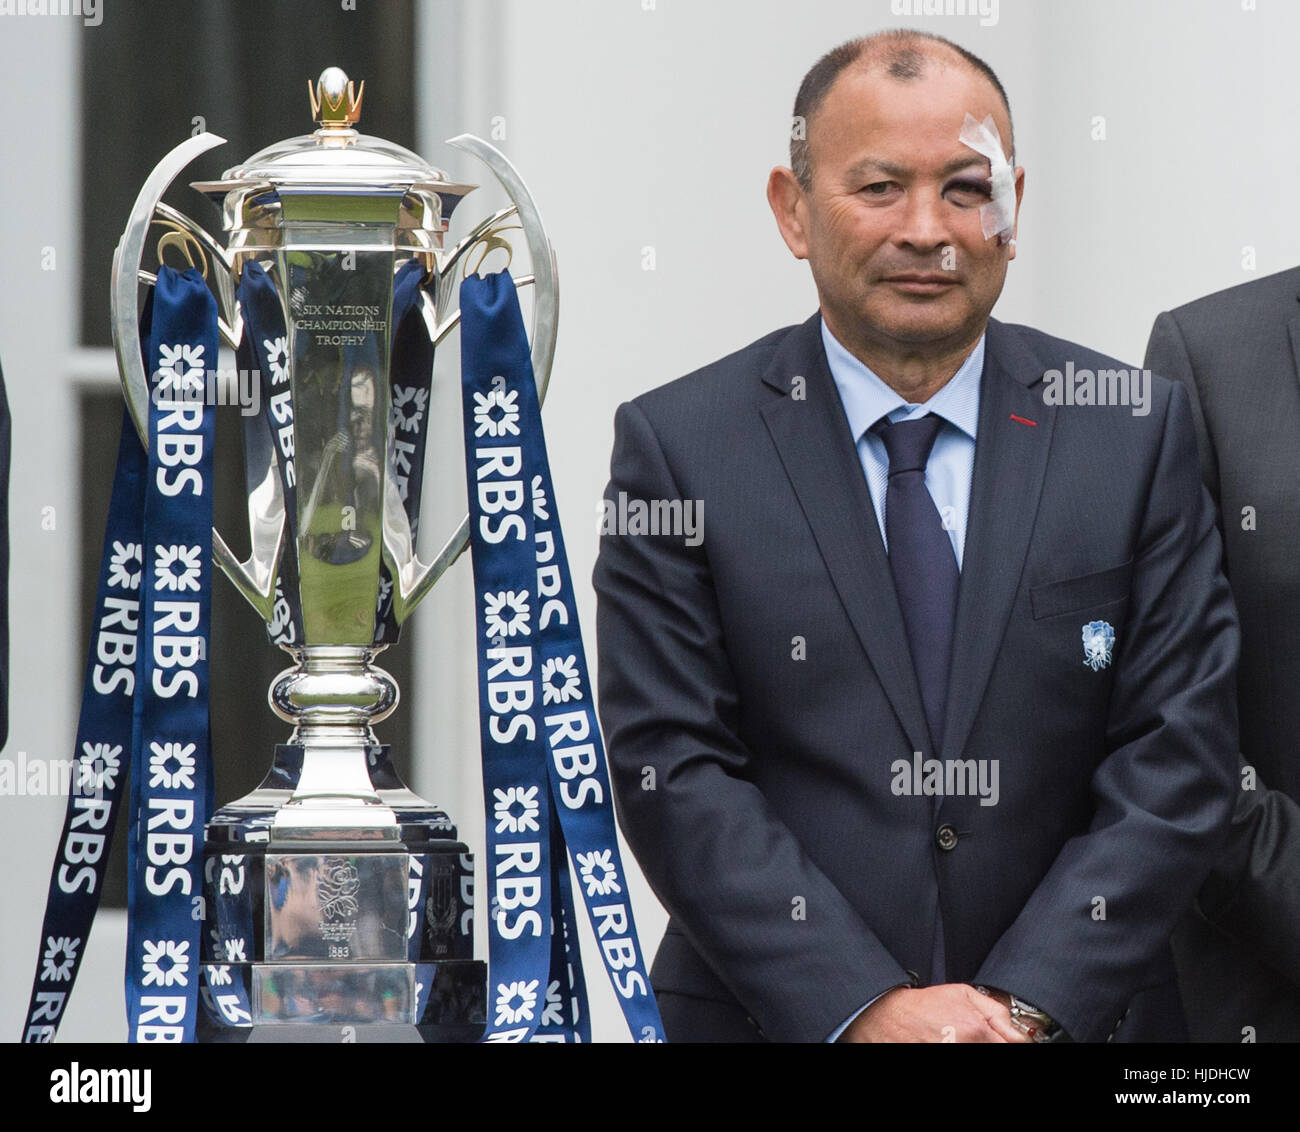 London, UK. 25th January 2017. England Head Coach Eddie Jones with the six nations trophy at the launch of the RBS 6 Nations Championship at the Hurlingham Club London Credit: Alan D West/Alamy Live News Stock Photo